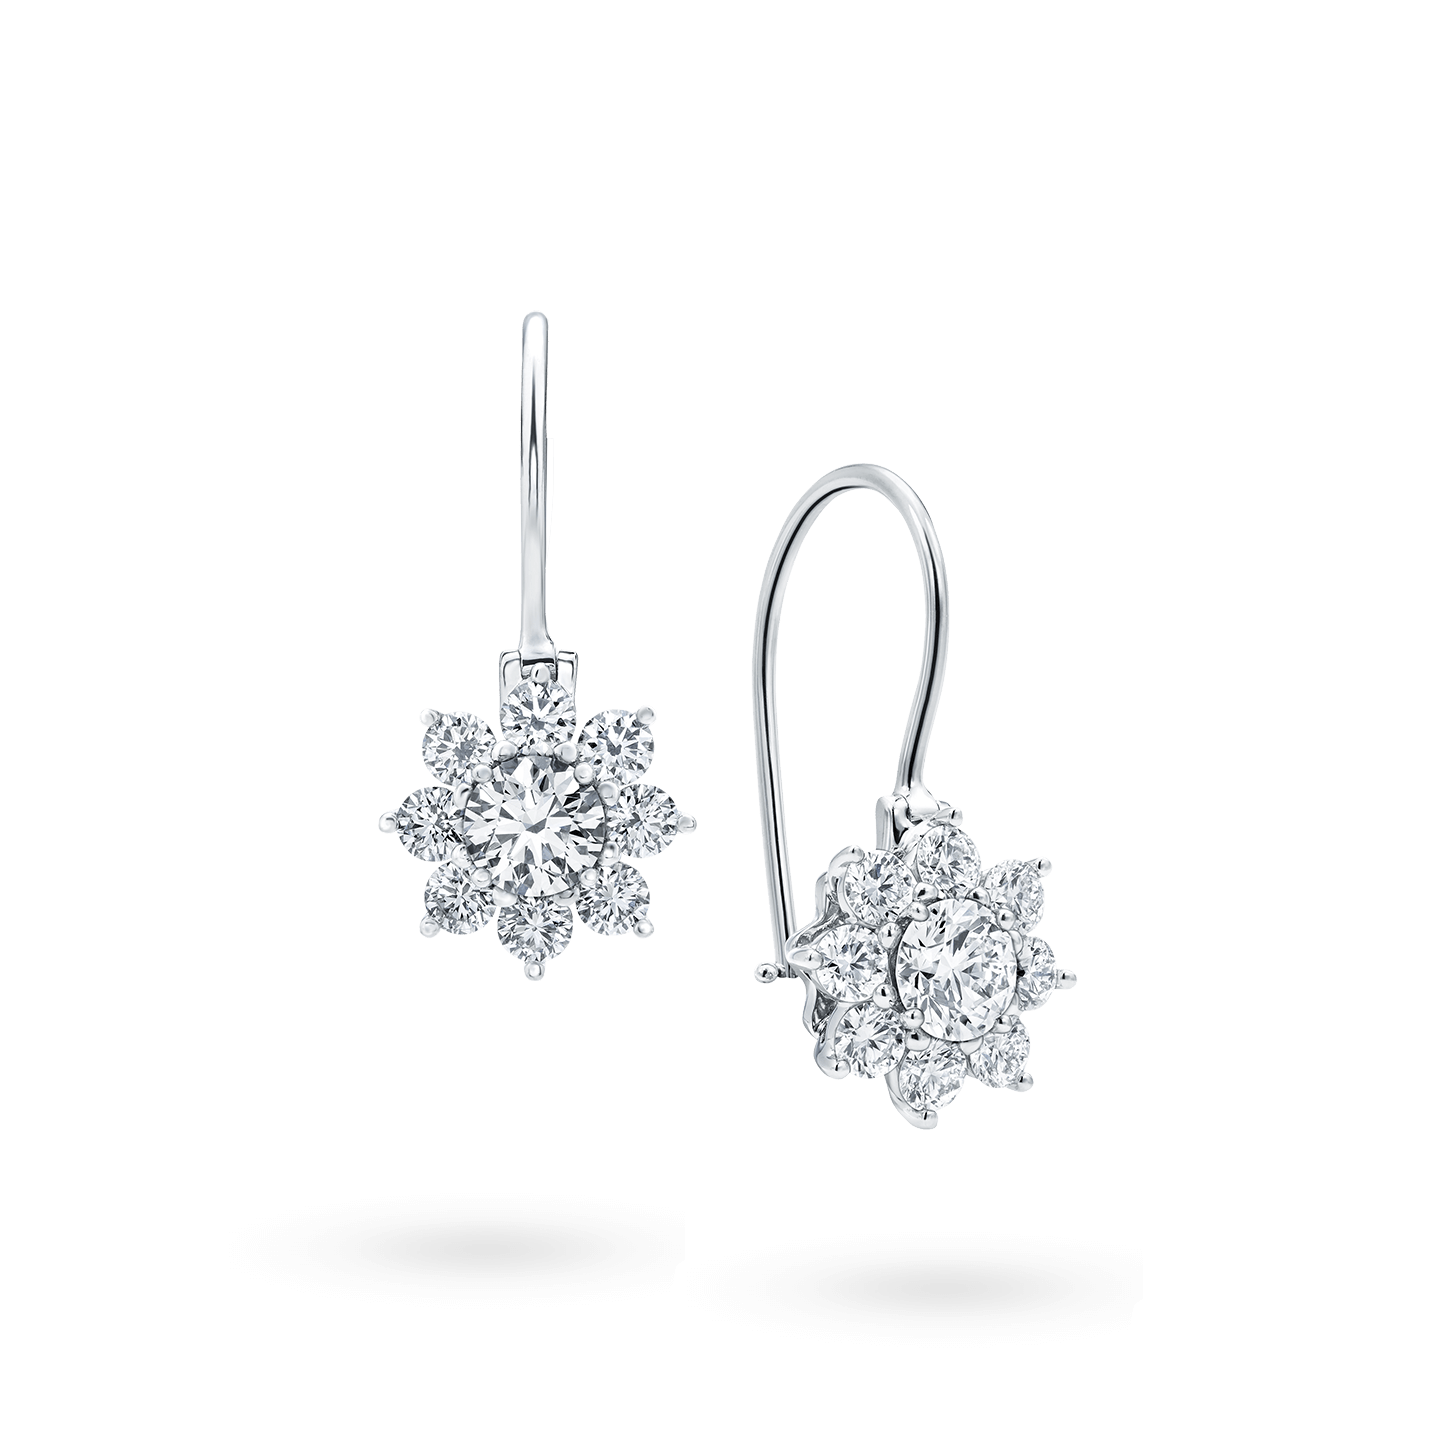 Sunflower Petite Earrings on Platinum Wire, Product Image 2